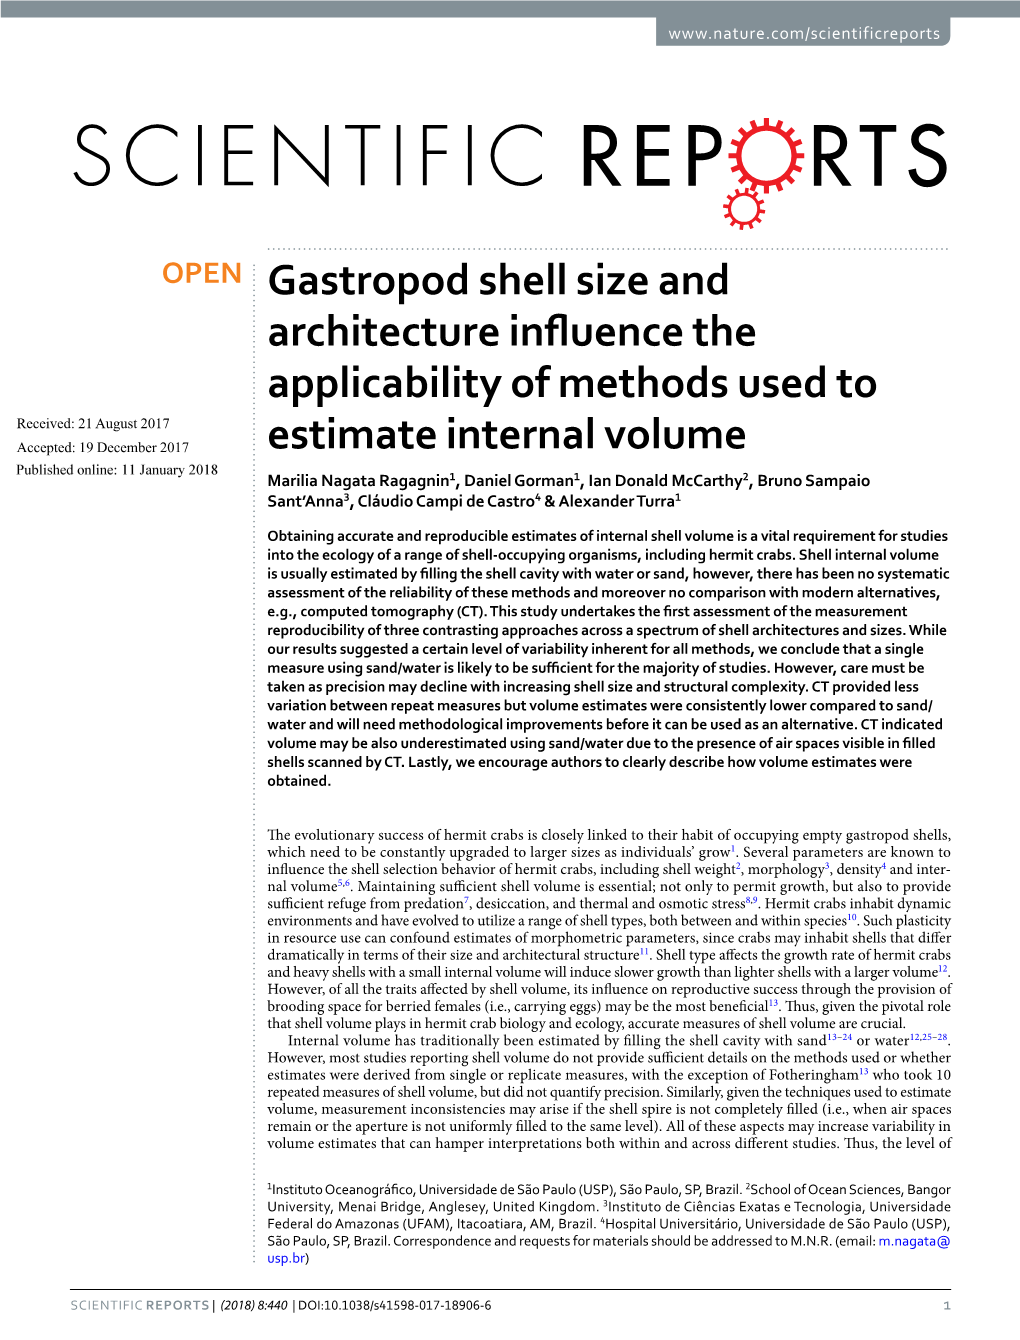 Gastropod Shell Size and Architecture Influence the Applicability Of